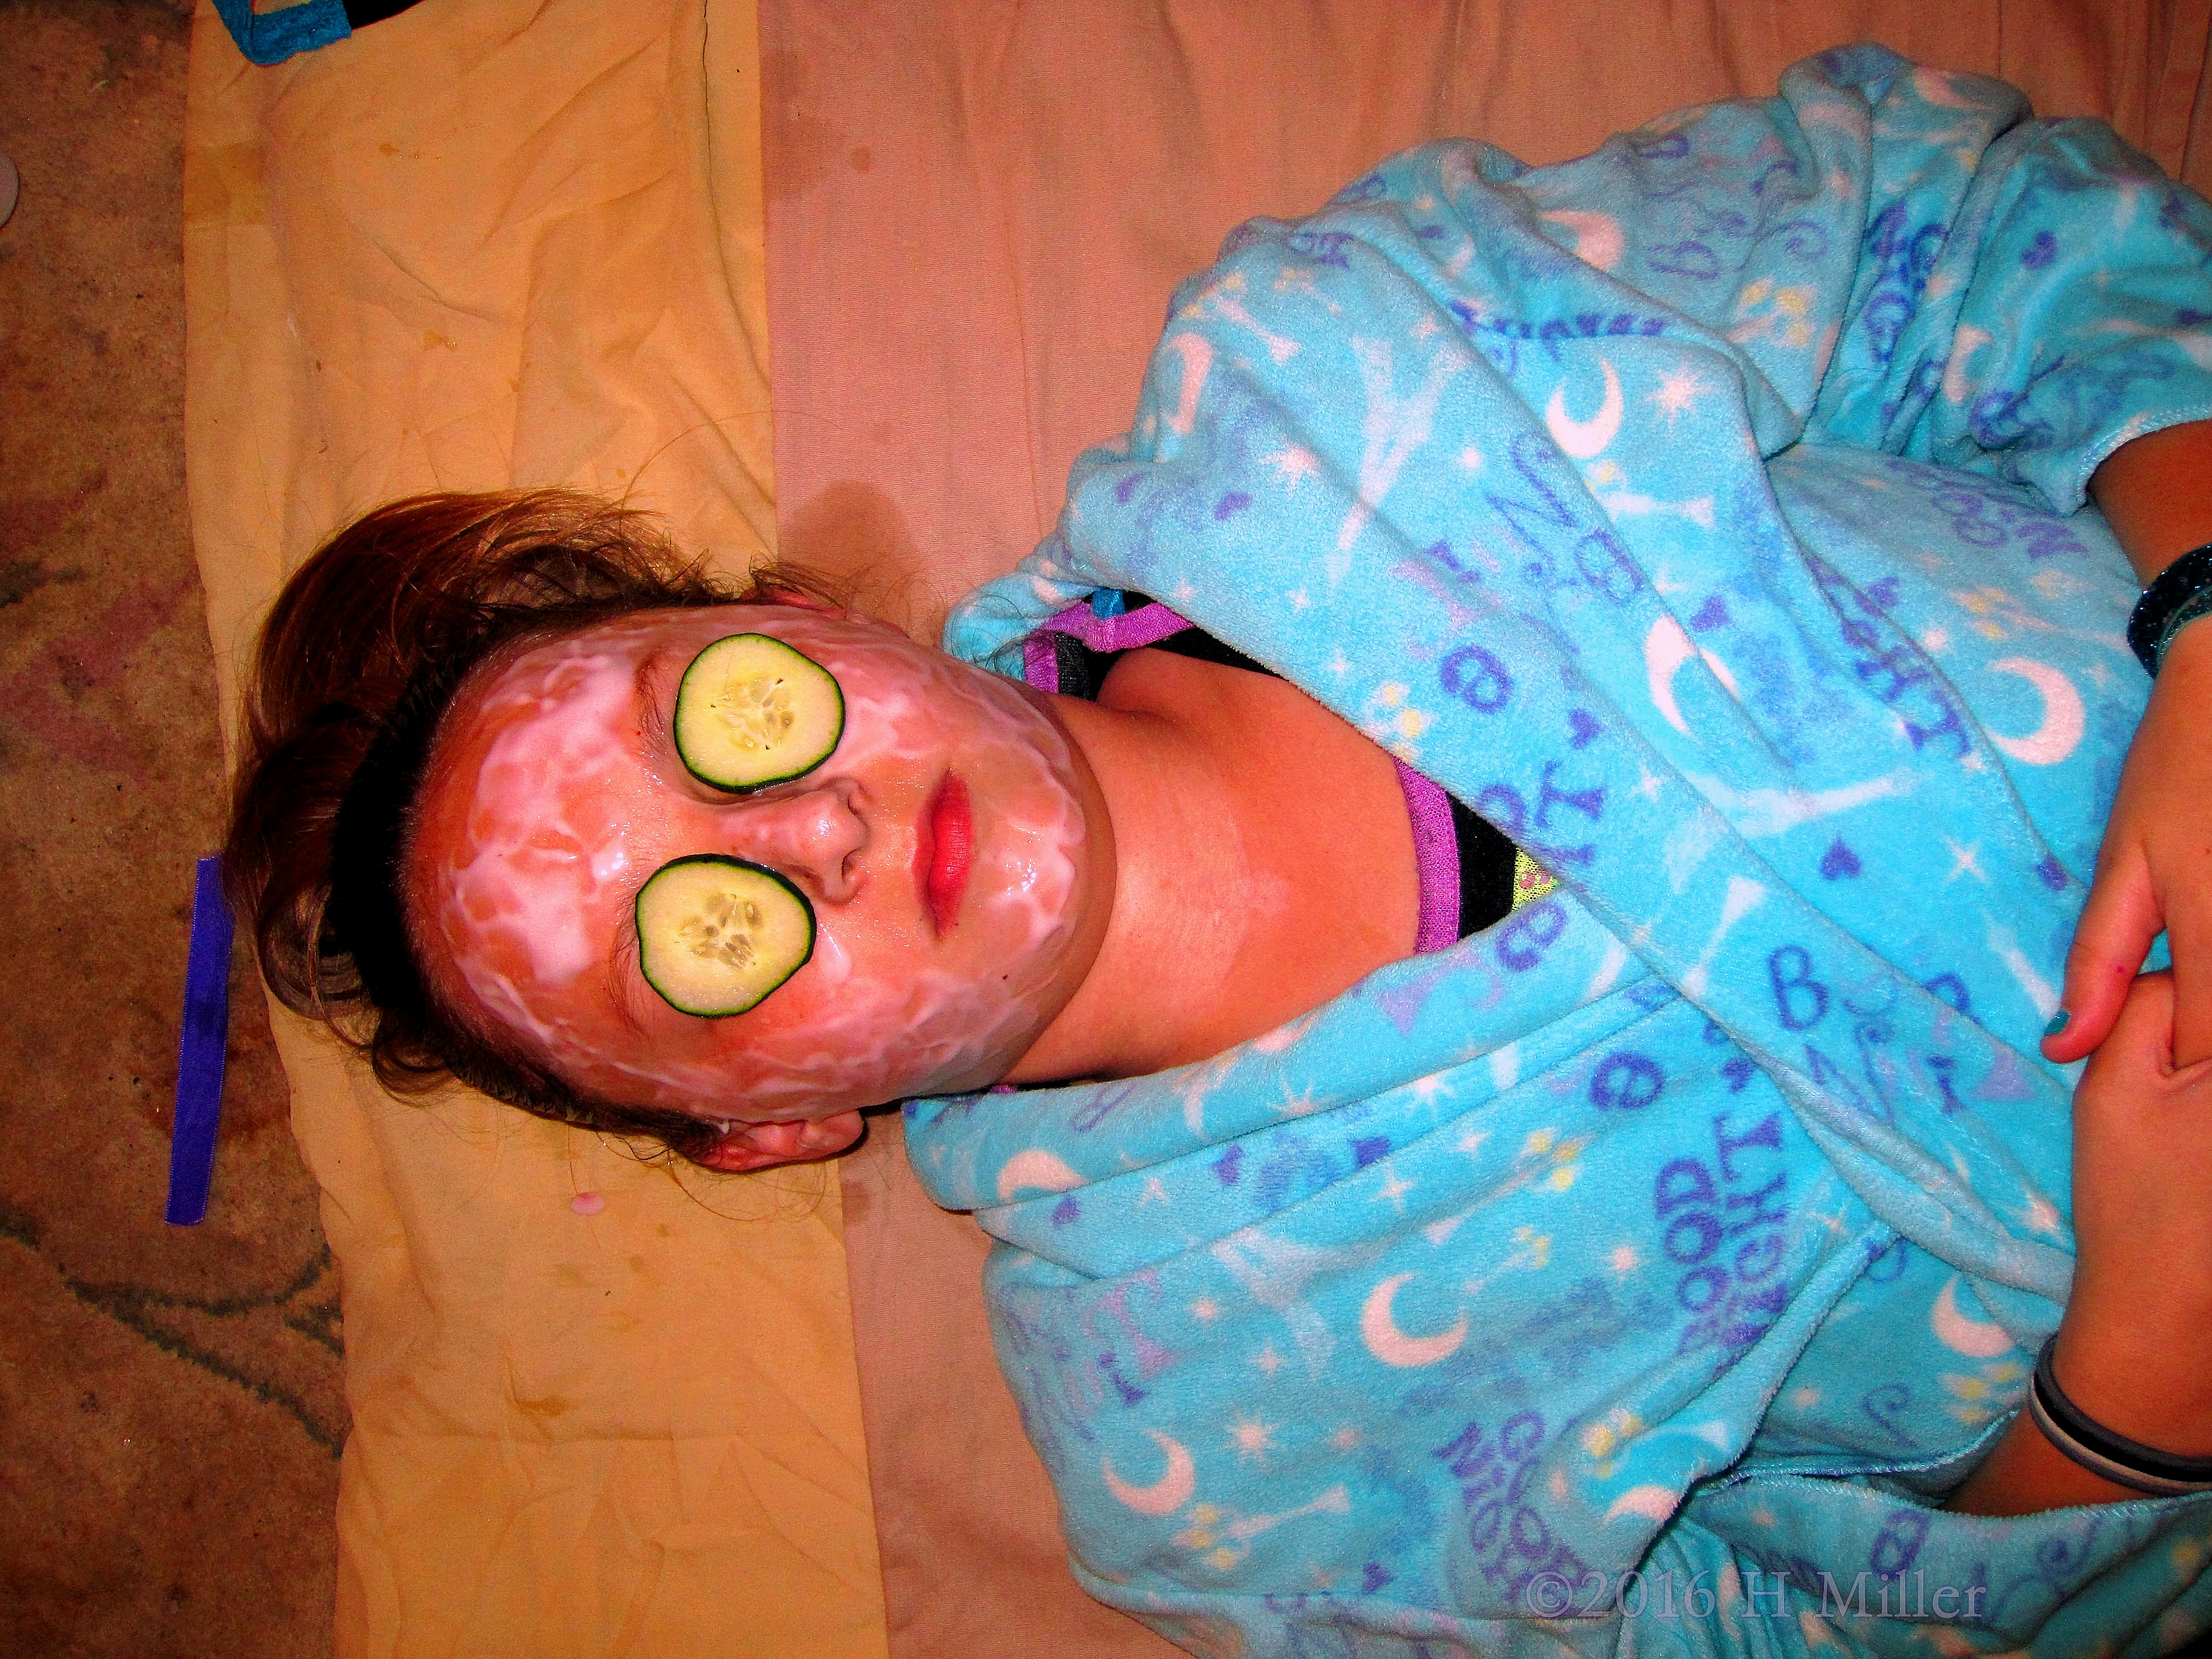 With Facial Masque On And Cukes Over The Eyes, She Relaxes During Her Girls Facial! 